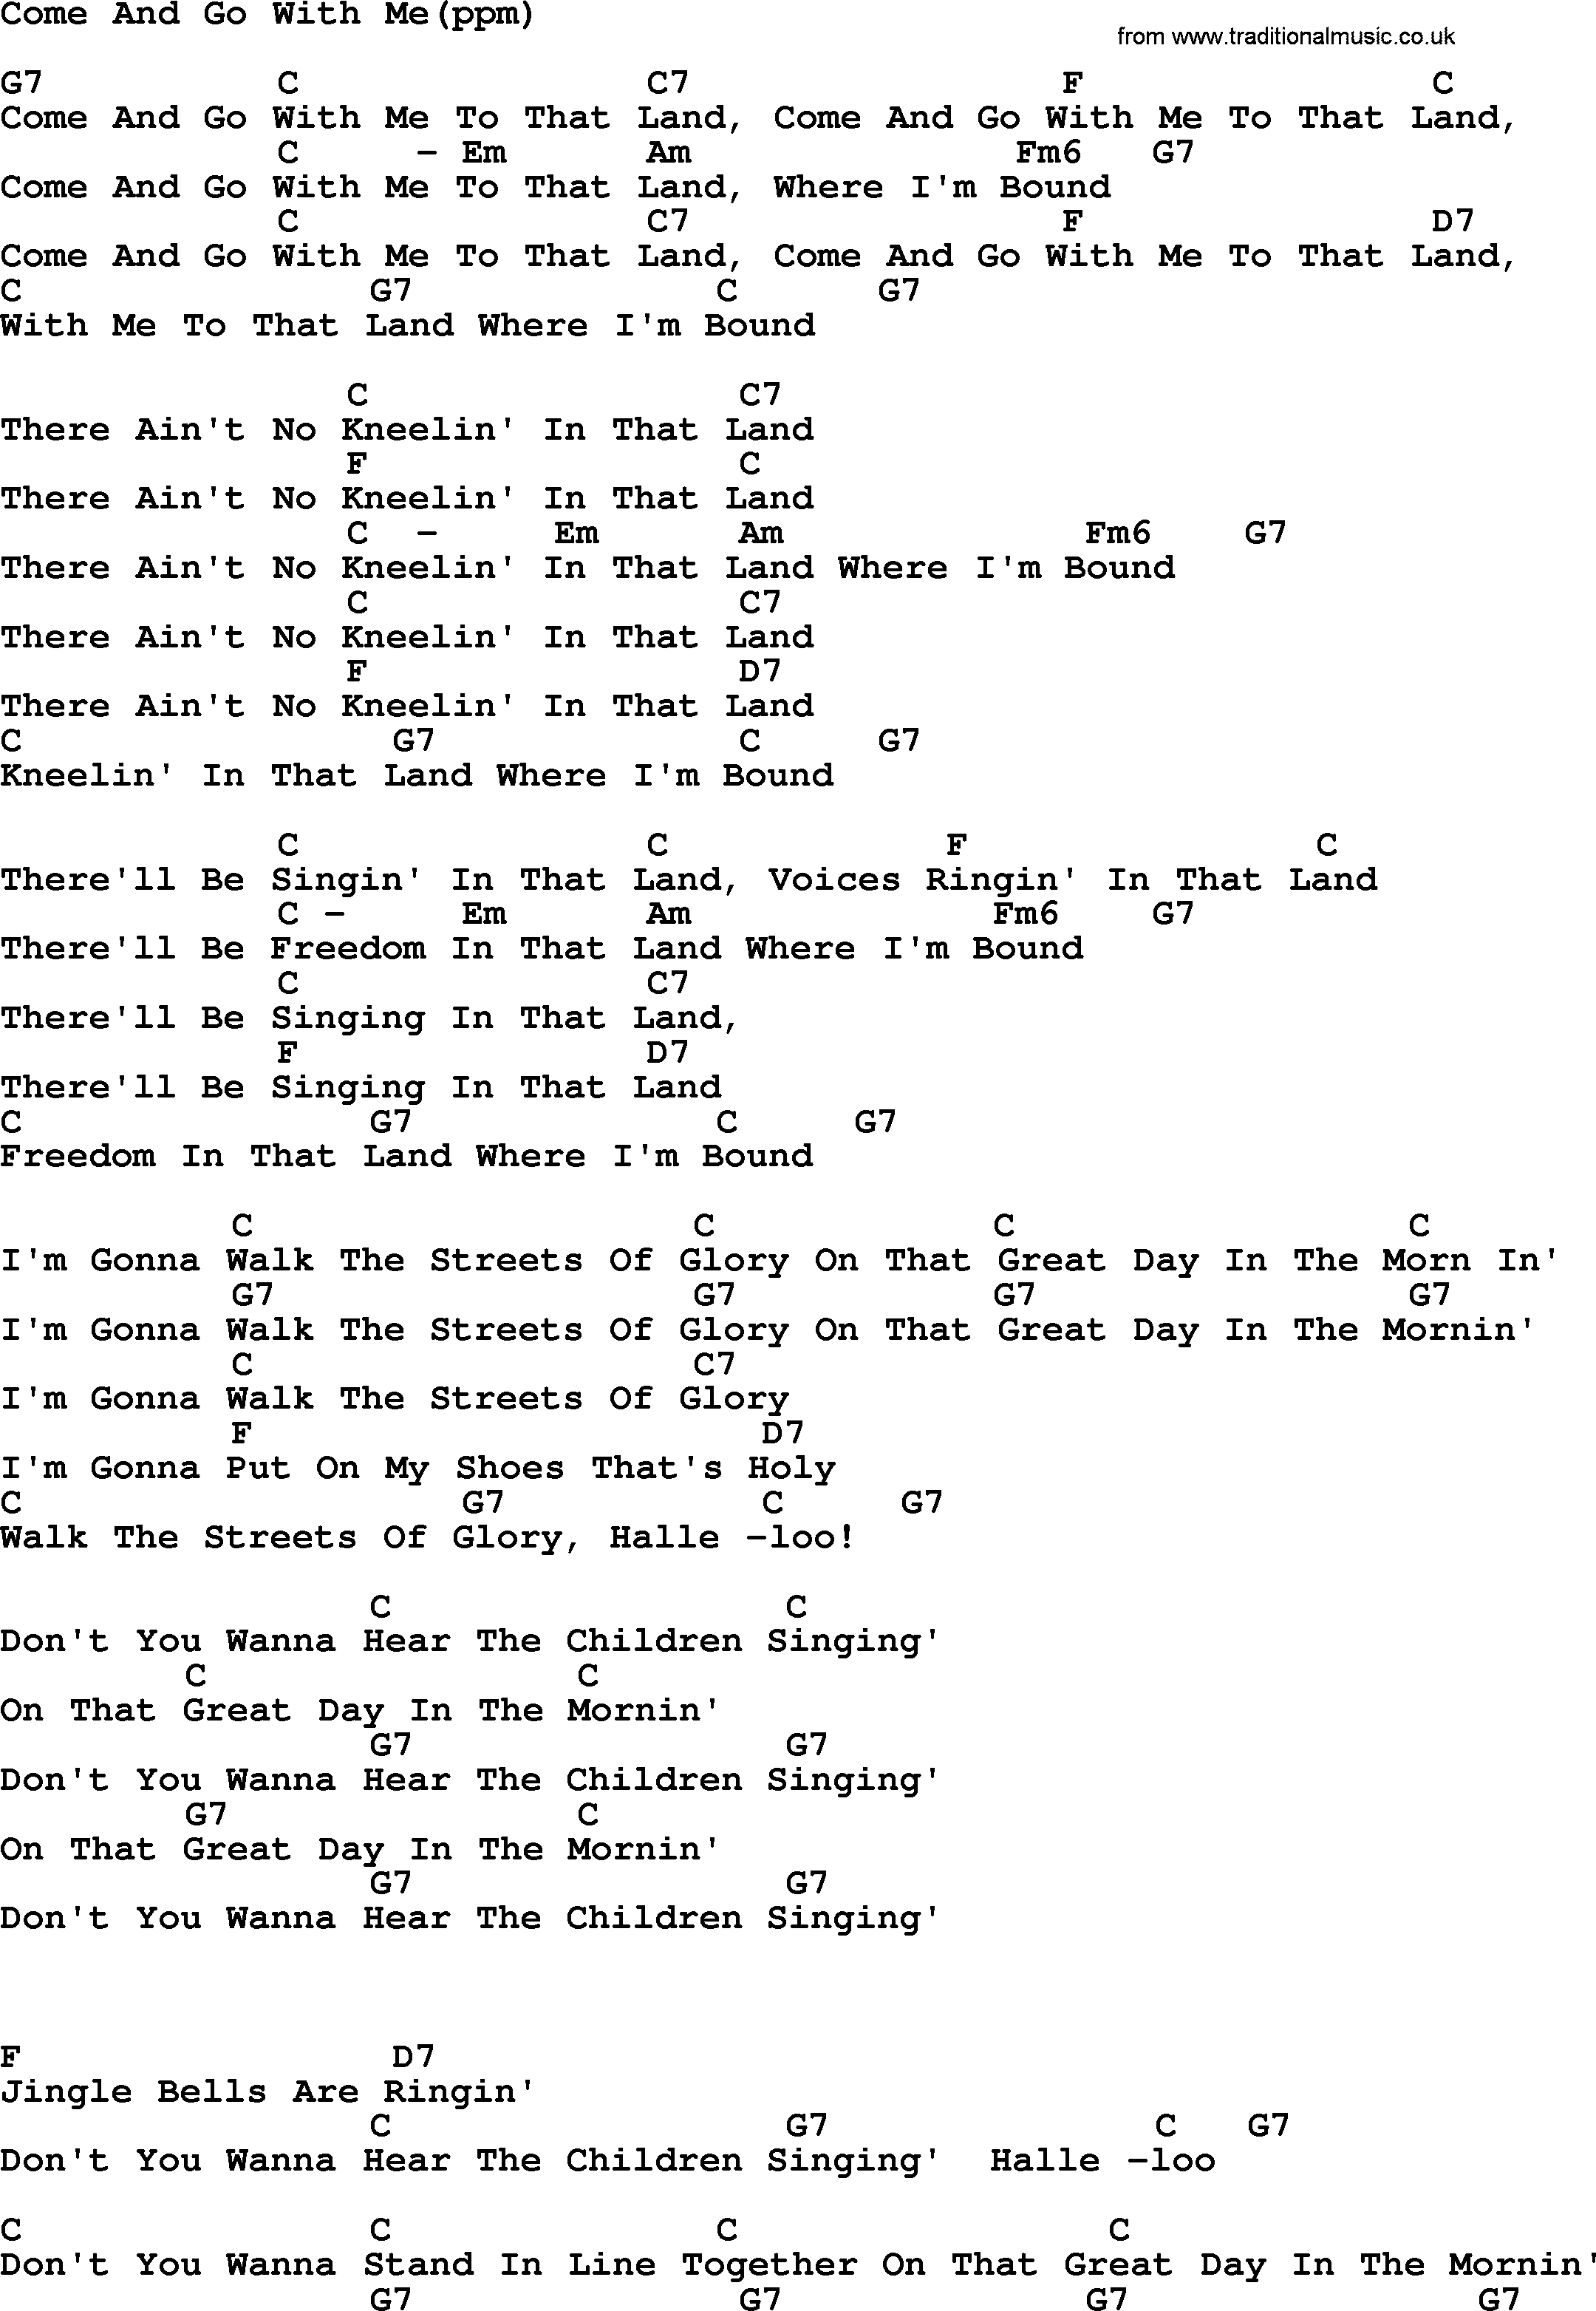 Peter, Paul and Mary song Come And Go With Me, lyrics and chords